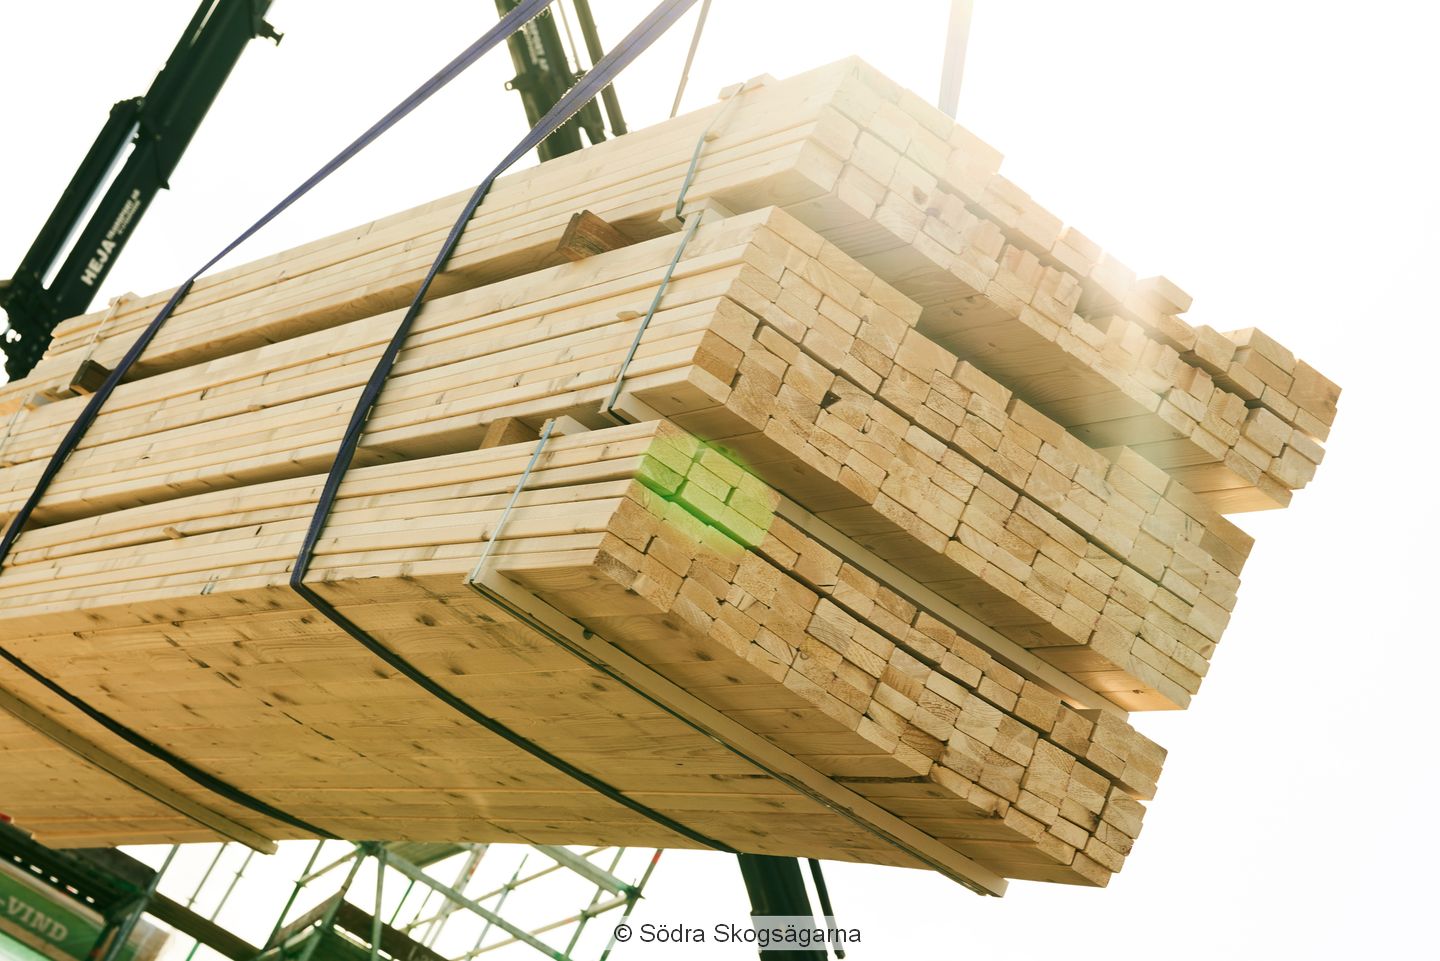 MM Kotka will discontinue sawmill operations by the end of this year